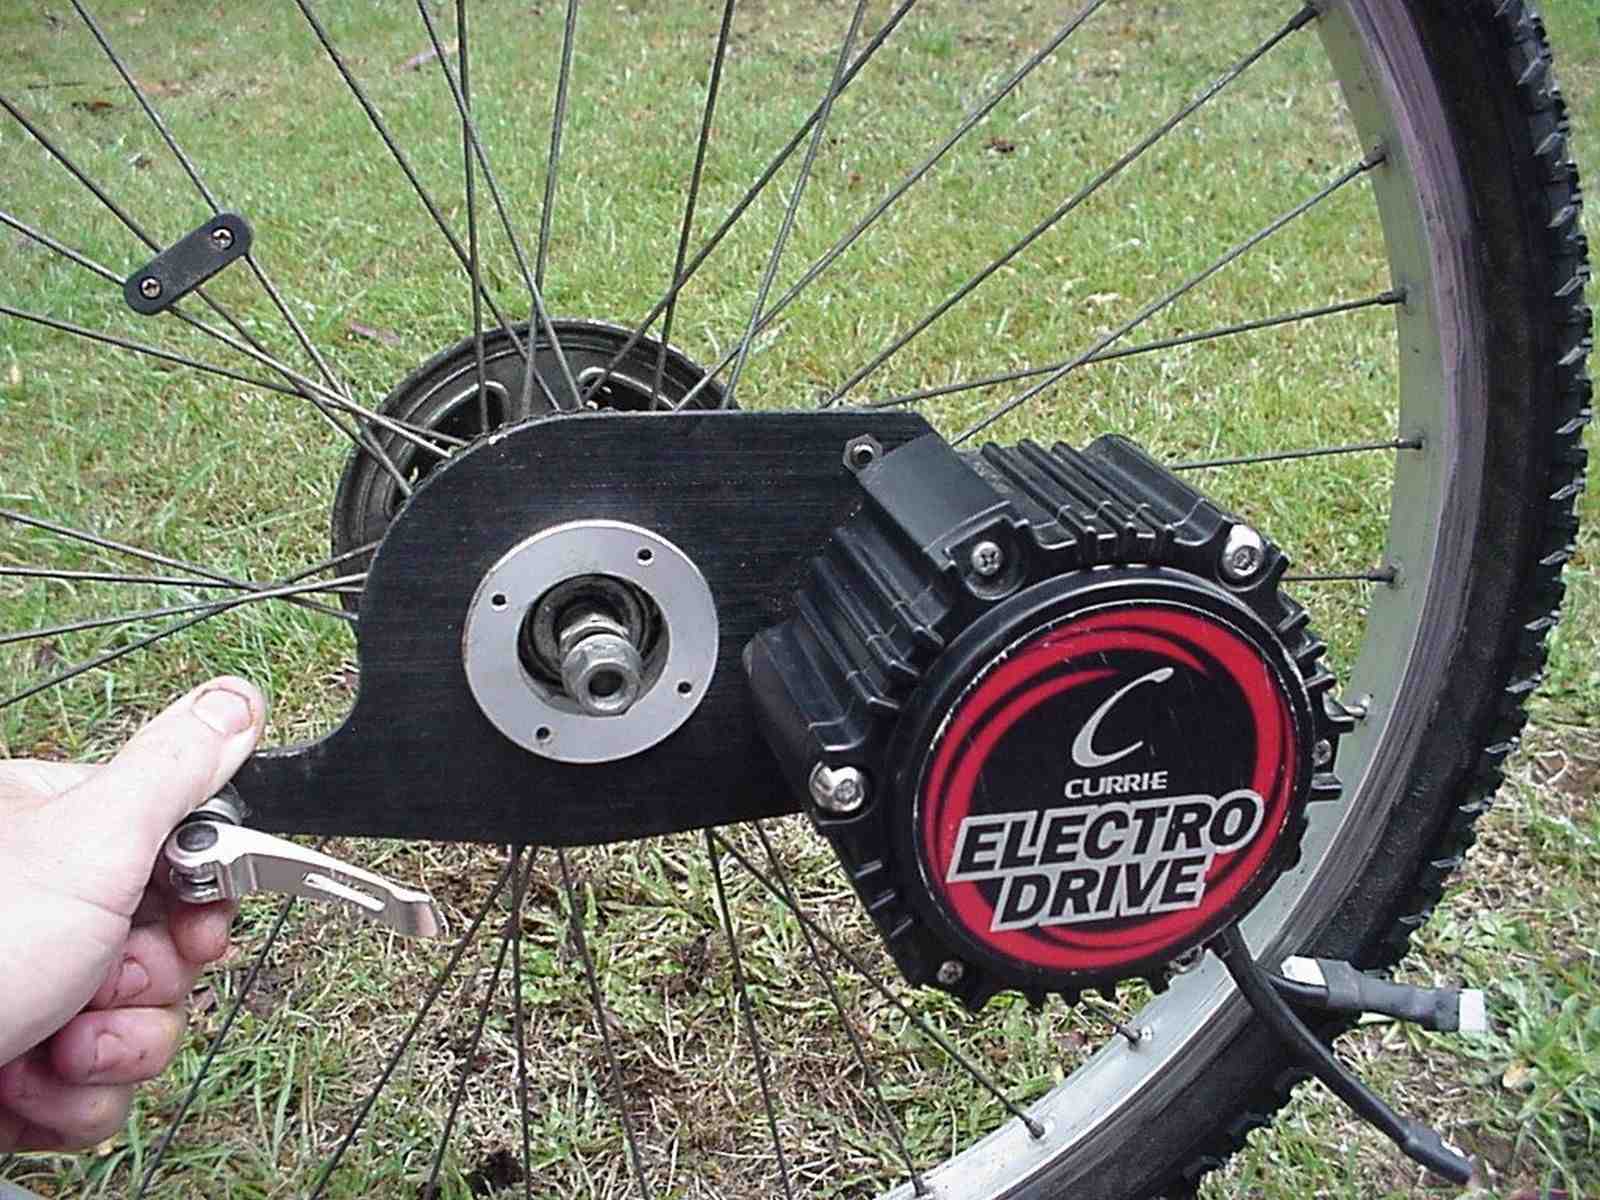 Where is the motor on an electric bike?